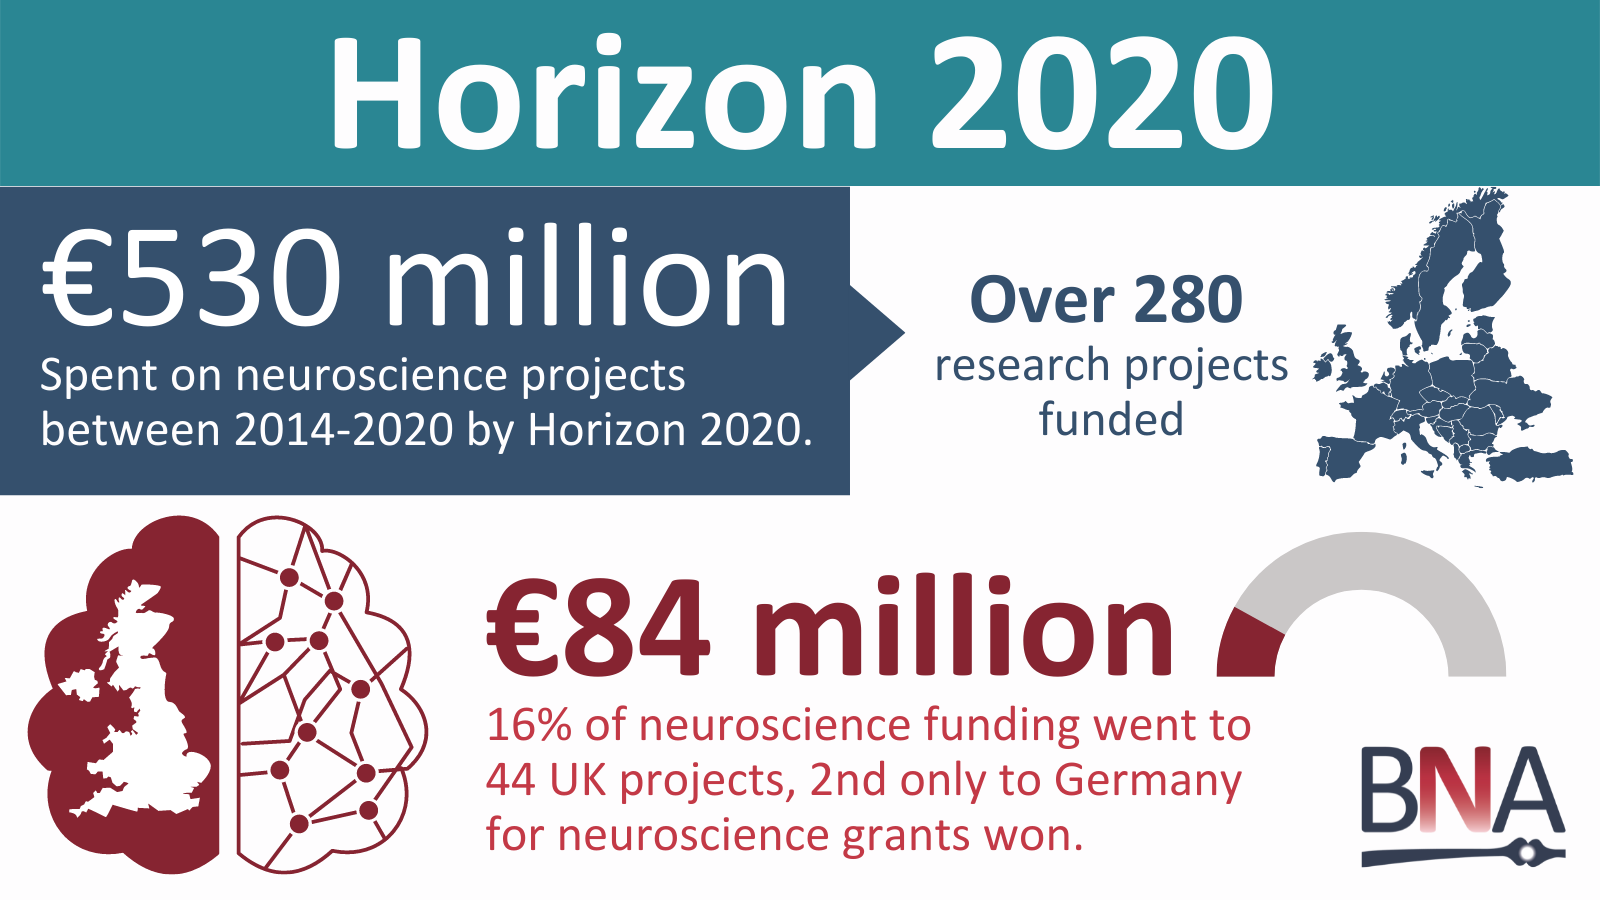 Infographic on Horizon 2020, the predecessor of Horizon Europe, from which UK neuroscience received 84 million Euros in funding, 2nd only to Germany for funding.